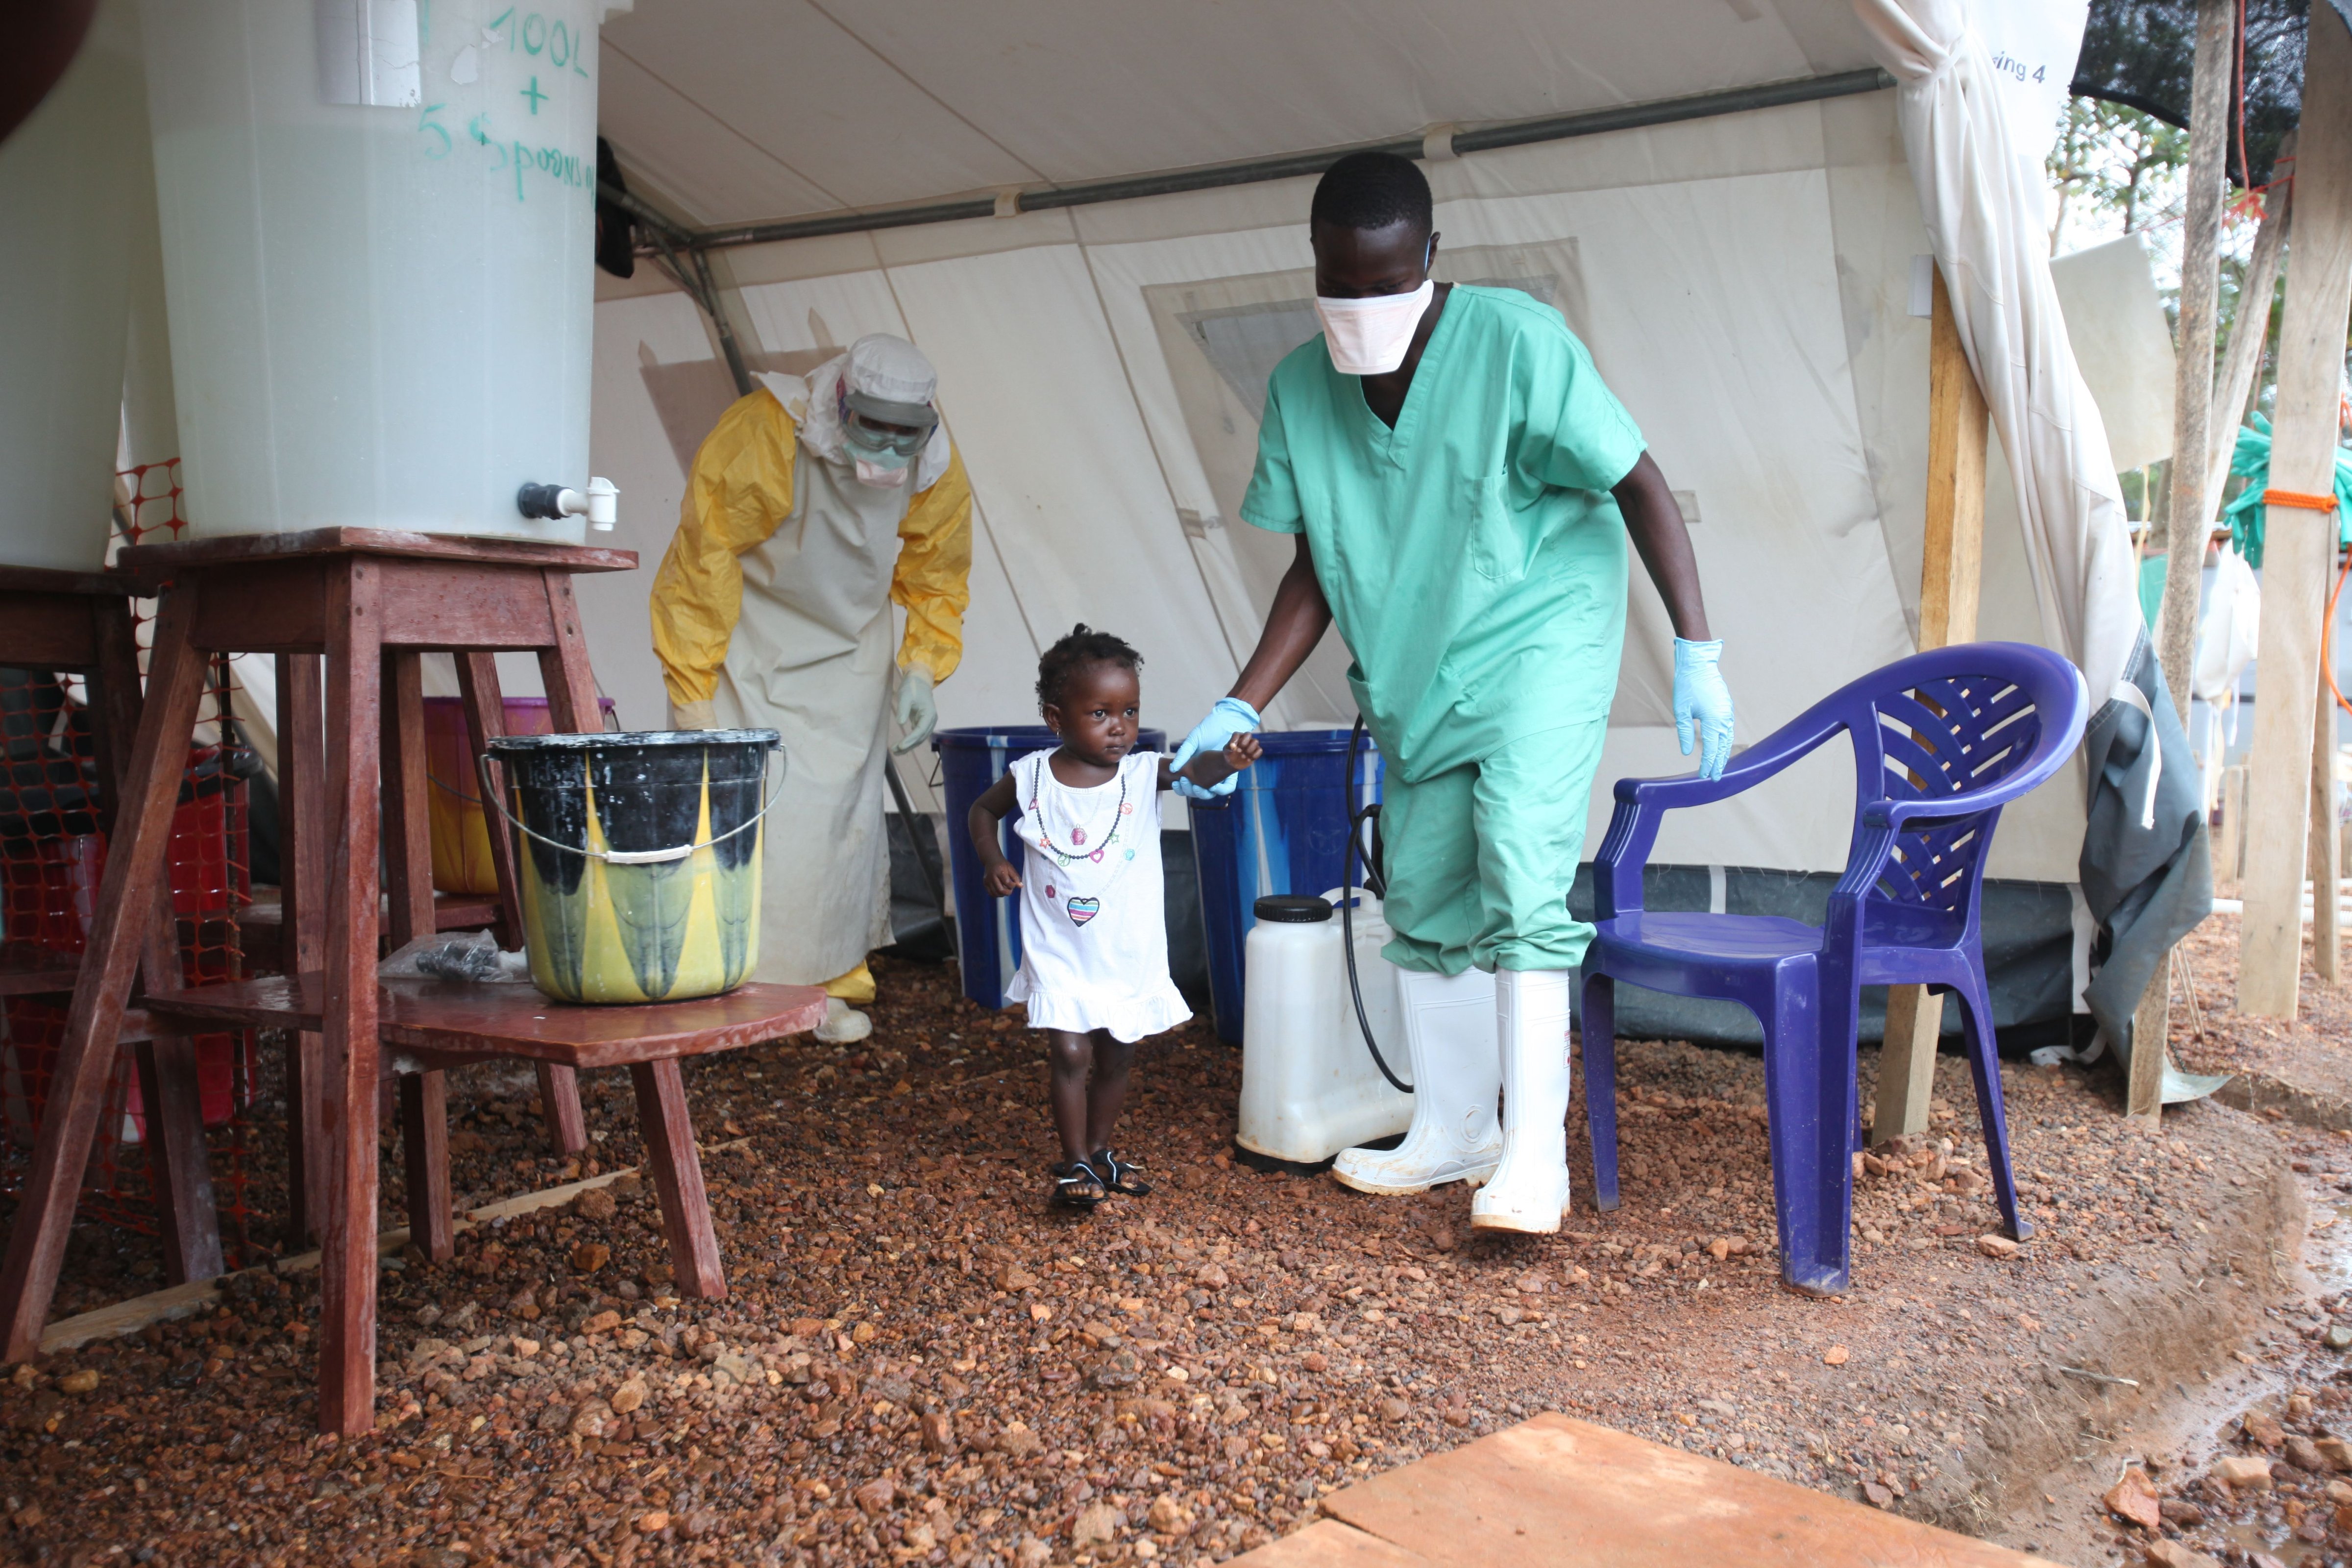 Isata, a 22-month-old, is the youngest patient to be discharged from the Ebola treatment centre in Kailahun district, Sierra Leone on Aug. 6, 2014.